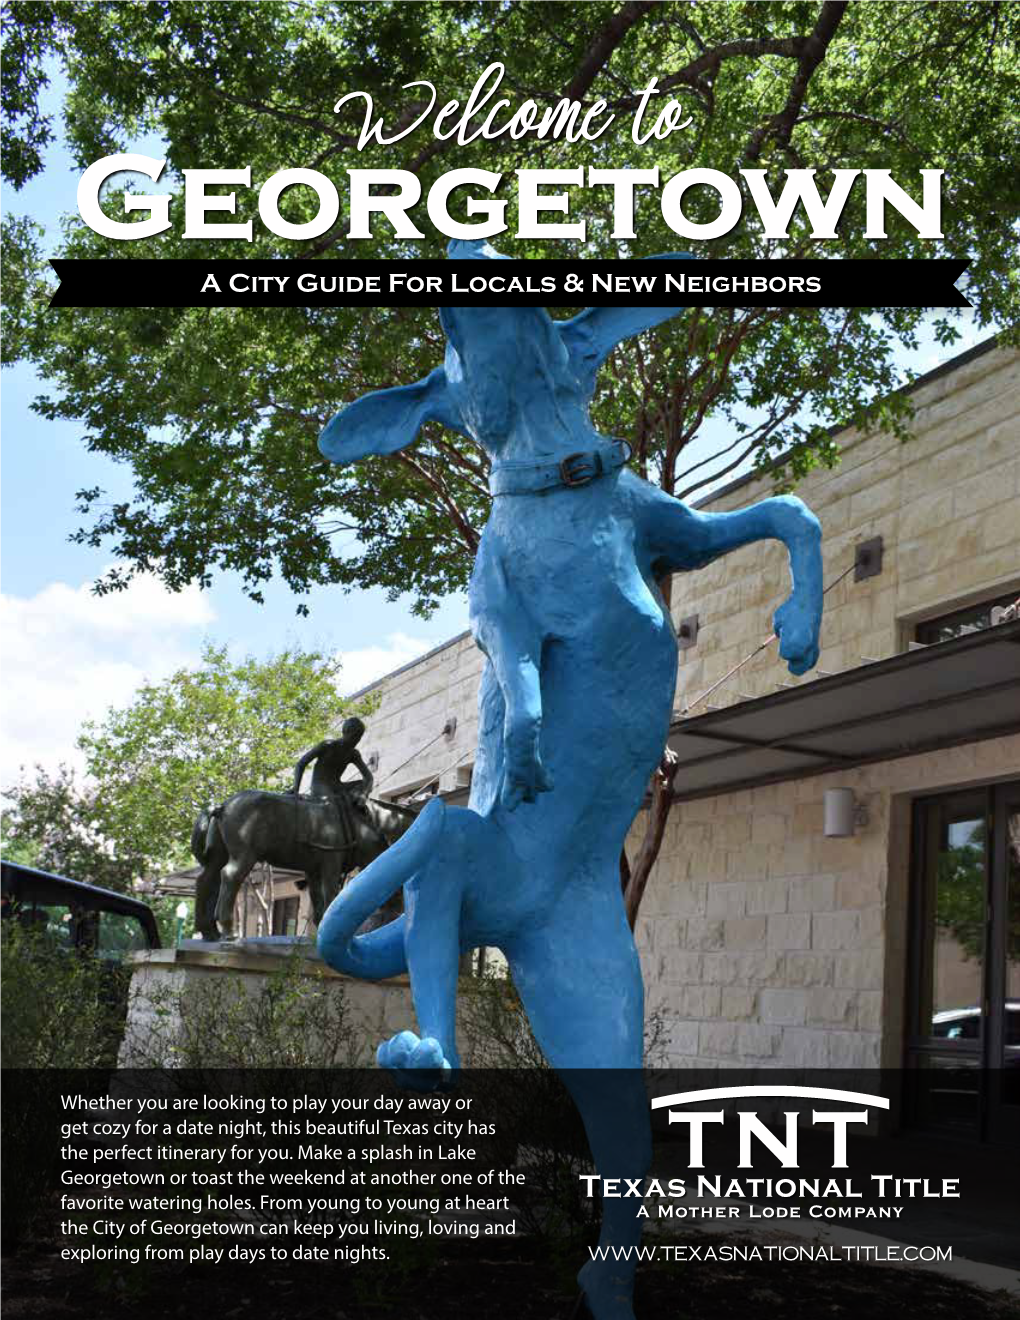 Georgetown Drippinga City Guide Springs, for Locals & Newtexas Neighbors